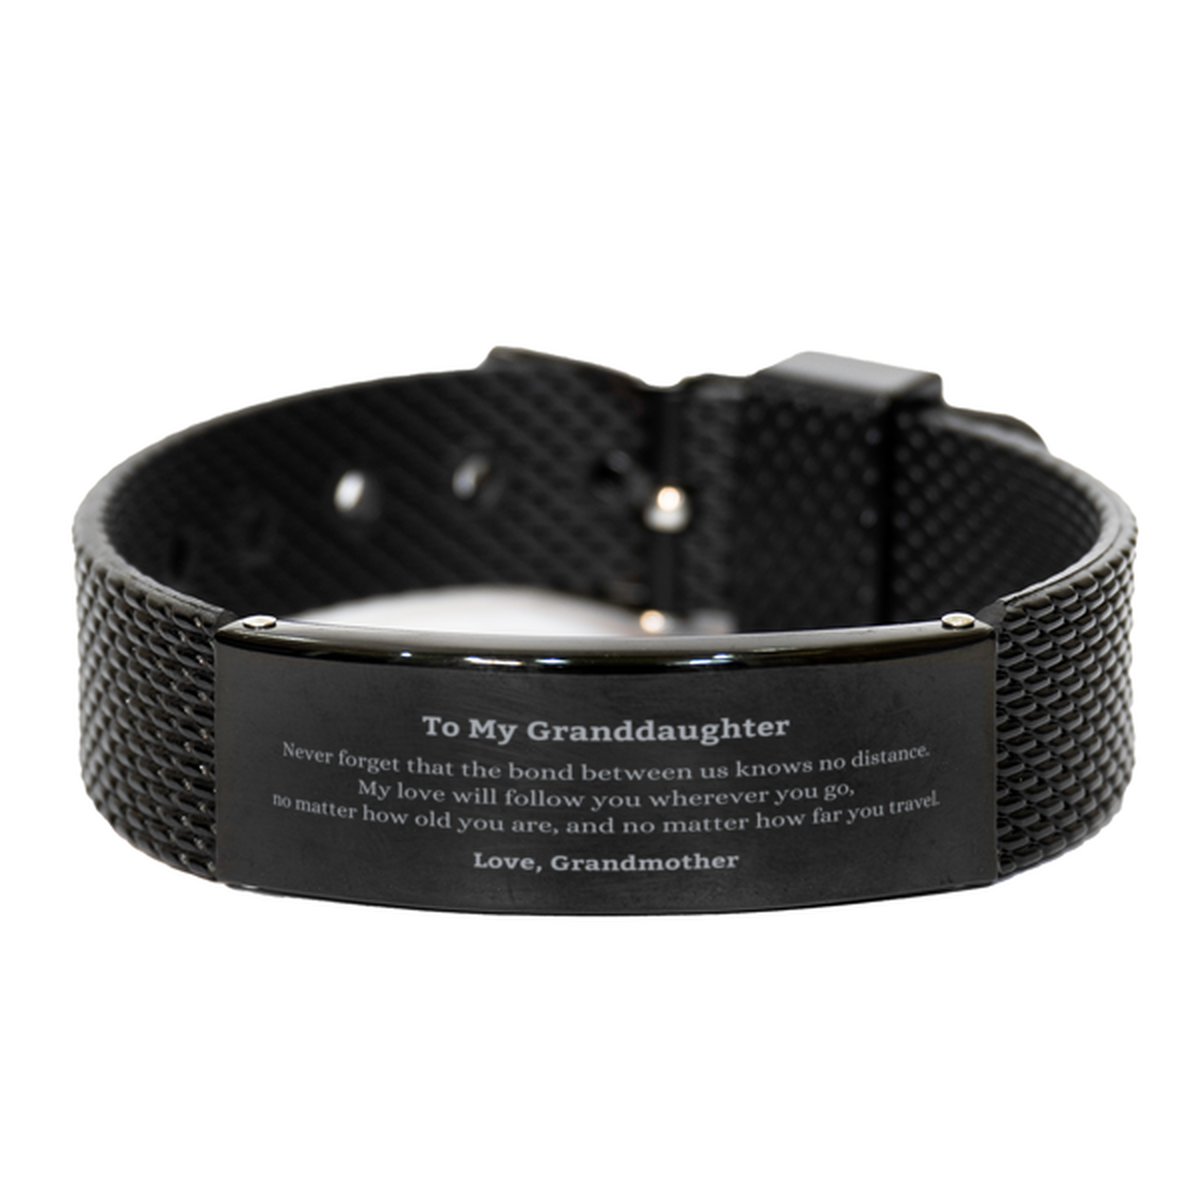 Granddaughter Birthday Gifts from Grandmother, Adjustable Black Shark Mesh Bracelet for Granddaughter Christmas Graduation Unique Gifts Granddaughter Never forget that the bond between us knows no distance. Love, Grandmother